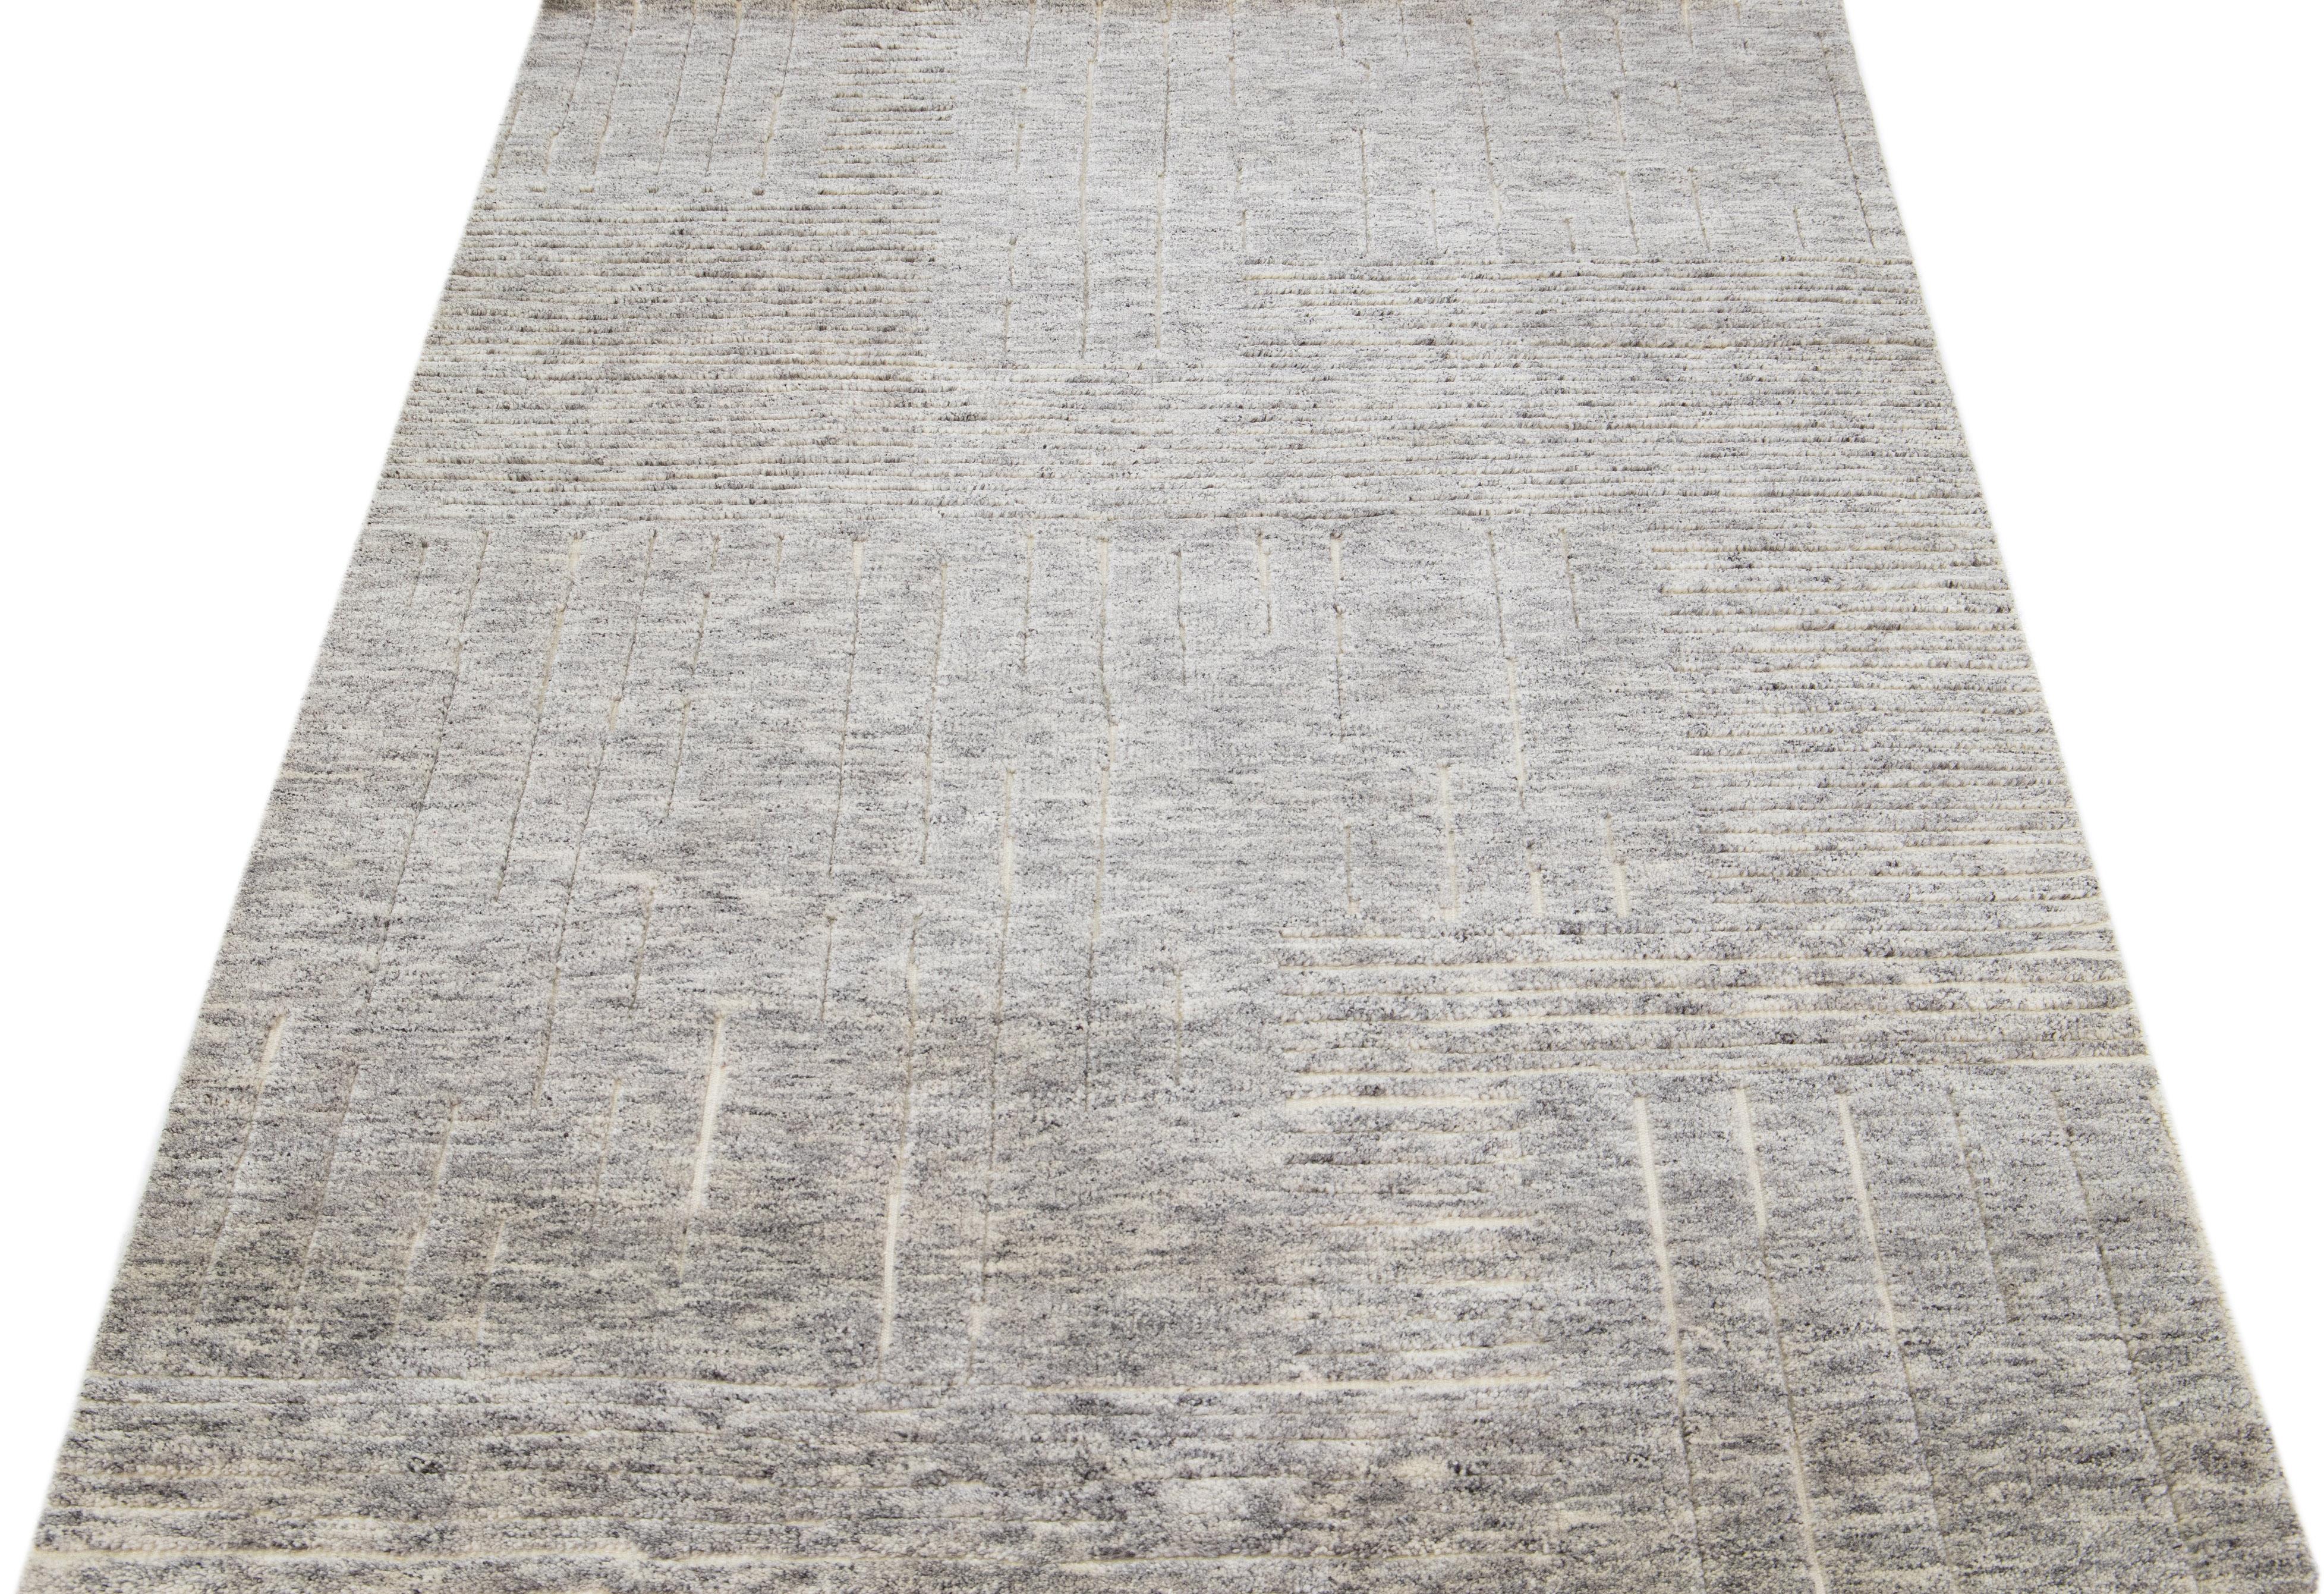 Beautiful modern Moroccan-style hand-knotted wool rug with a gray color field. This rug is part of our Apadana's Safi Collection and features a minimalist design in ivory.

This rug measures: 5' x 8'.

Our rugs are professional cleaning before